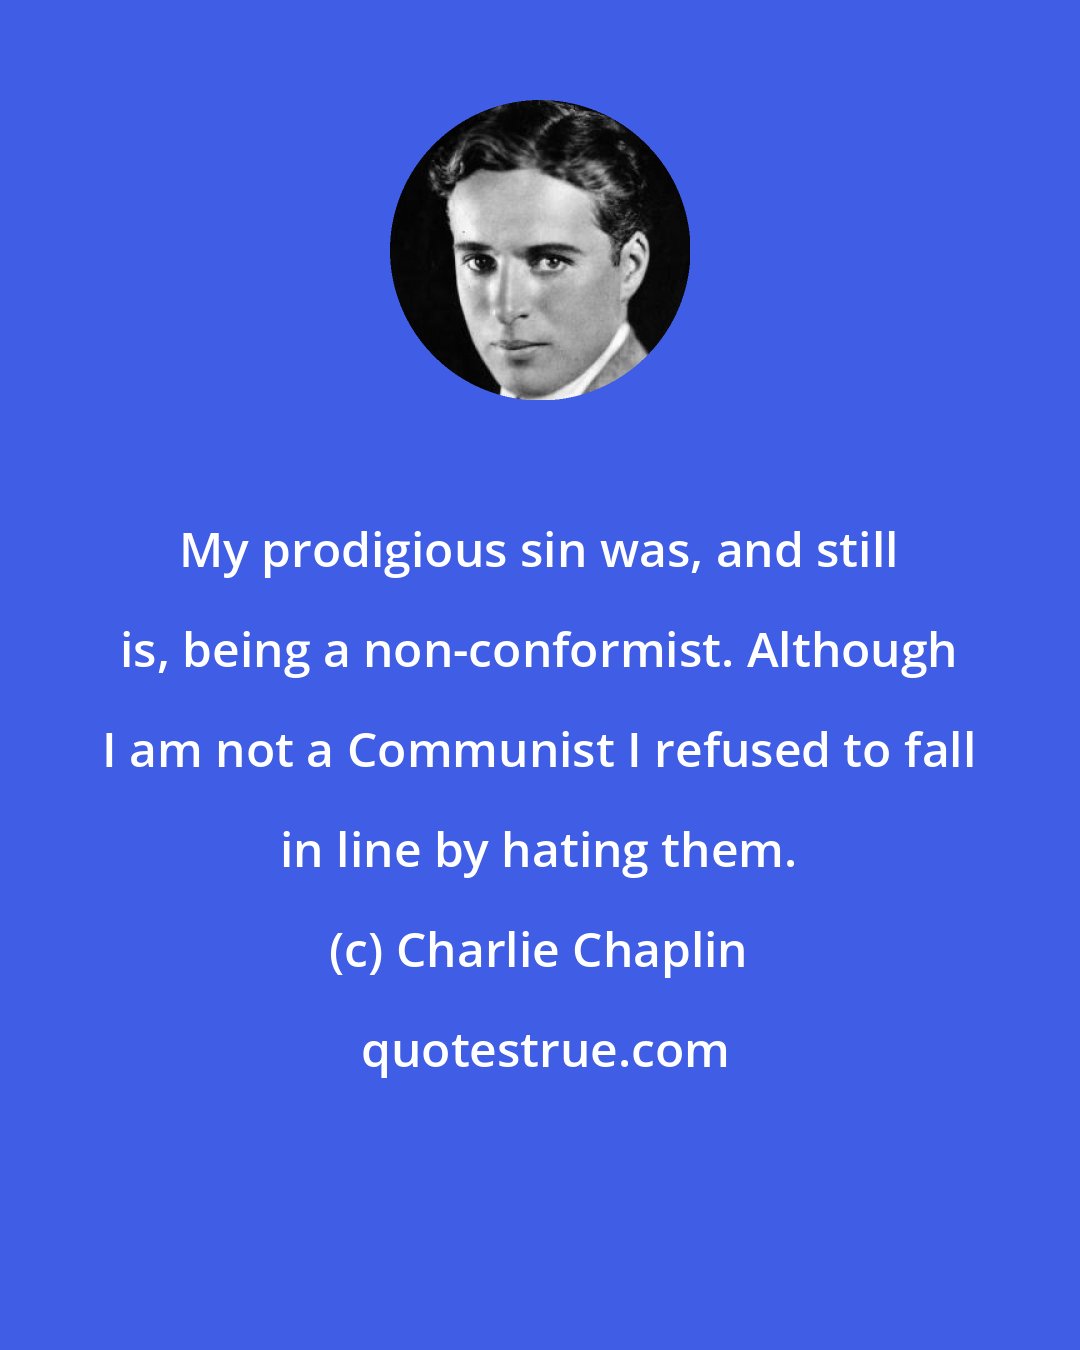 Charlie Chaplin: My prodigious sin was, and still is, being a non-conformist. Although I am not a Communist I refused to fall in line by hating them.